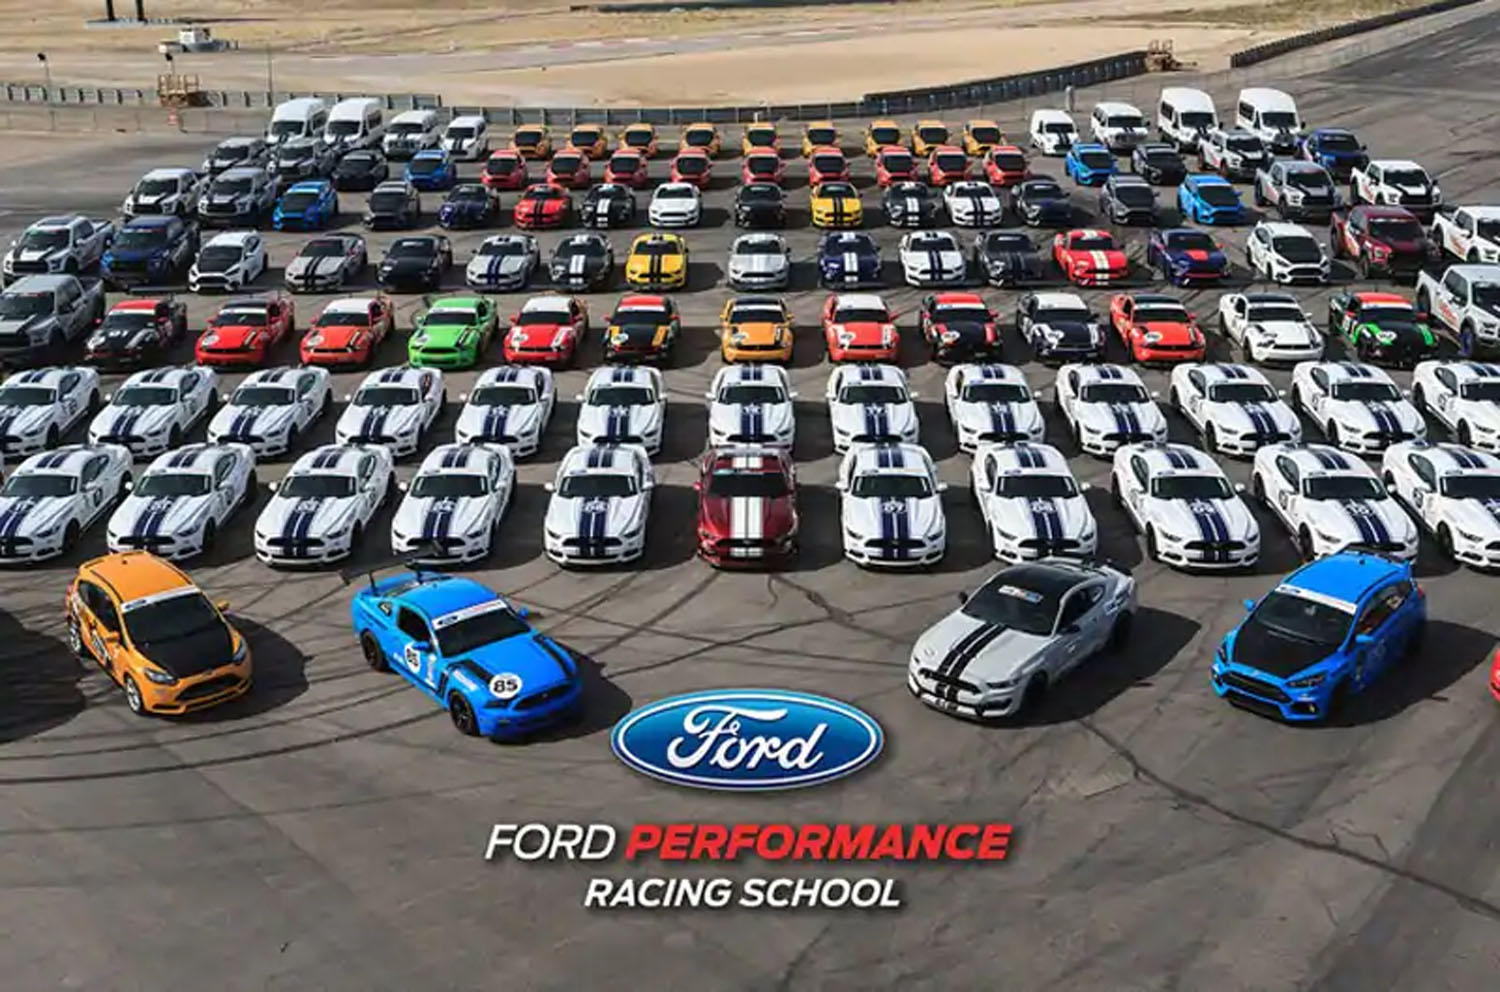 Ford Performance Racing School Moves To North Carolina